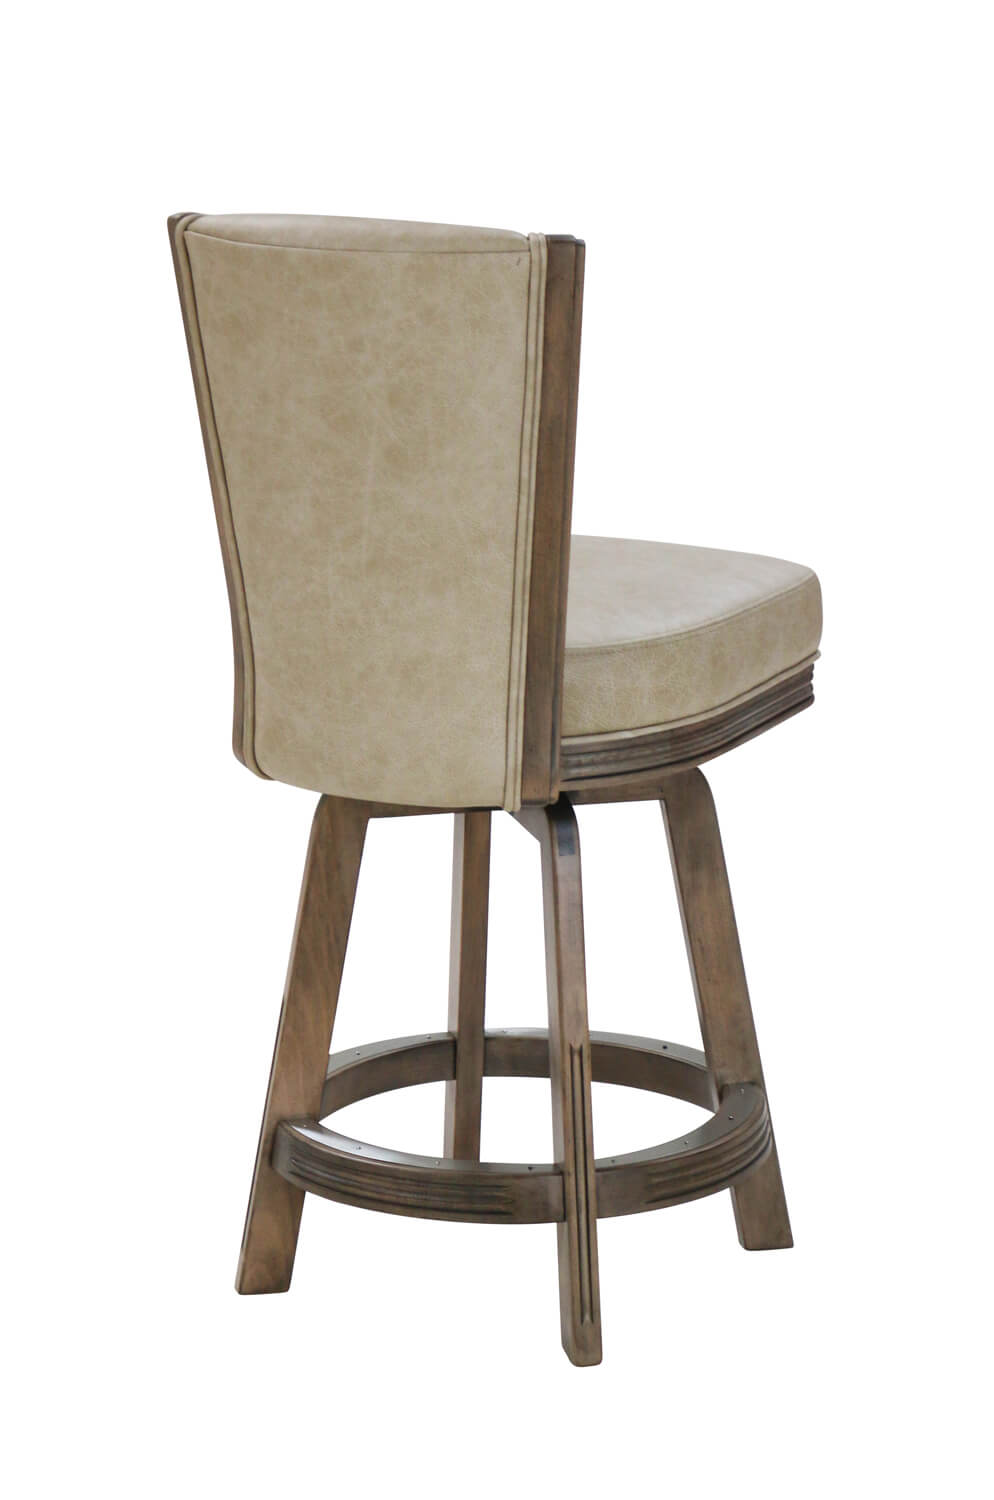 Darafeev's 915 Wood Swivel Bar Stool in Rustic Pewter Wood Finish and Leather Seat - View of Back